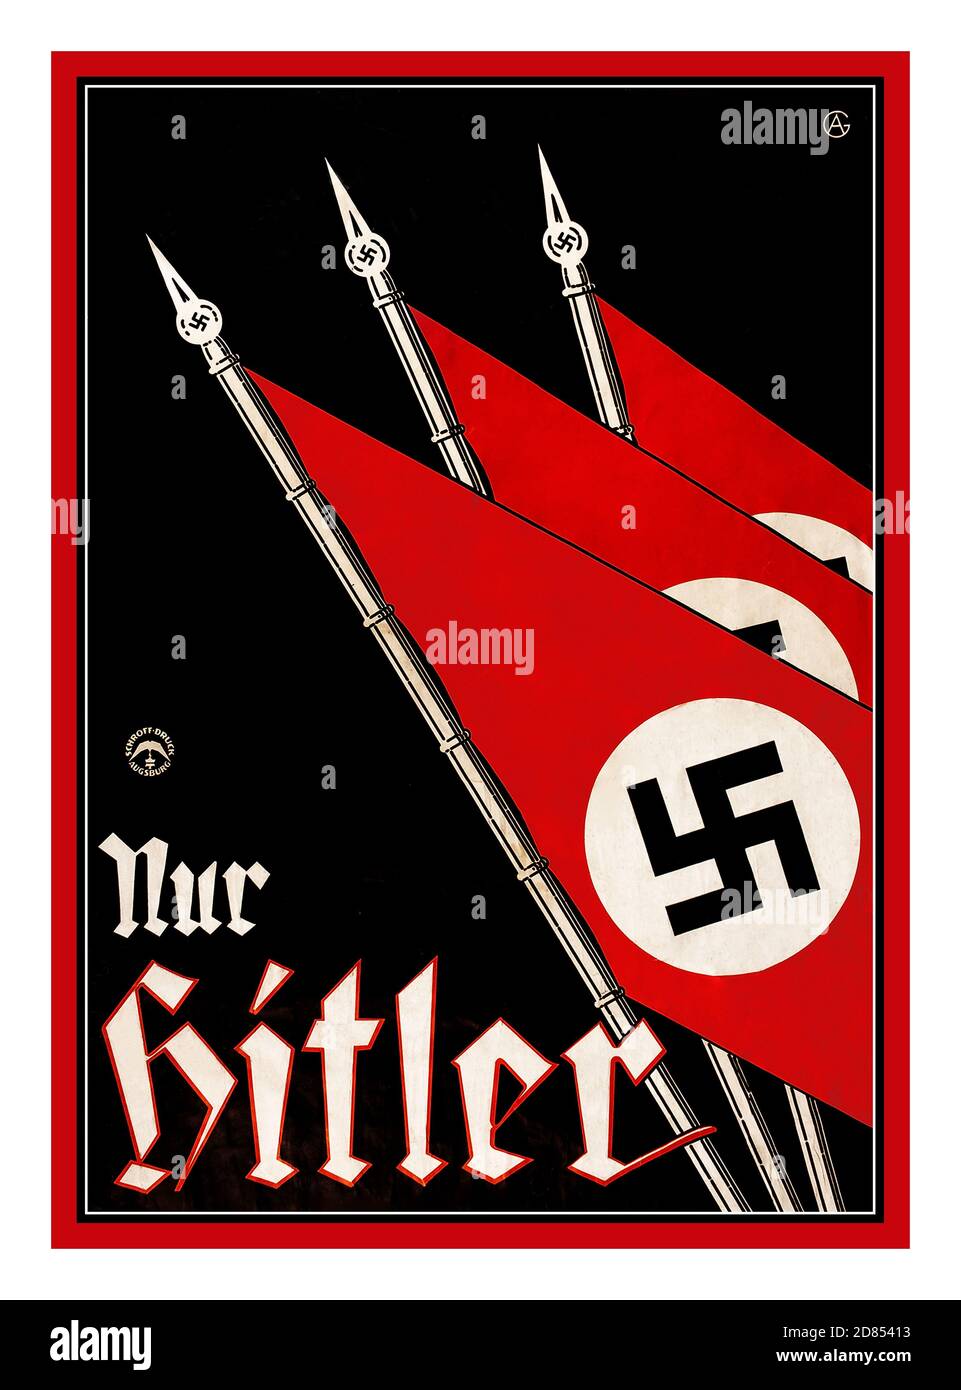 Vintage 1930's "Only Hitler” nur HITLER Propaganda Poster Lithograph with Swastika Flags. NSDAP Nazi Presidential Election c.1932 Germany. The National Socialist German Workers Party (NSDAP) was founded in 1920s. The ideology relied  on German nationalism and anti-Semitism. By 1921, Adolf Hitler became the leader of the NSDAP, a position which would later propel him to become dictator of the Nazi Germany German Third Reich. NSDAP populist propaganda symbolism kept in the mind of the German voters. Stock Photo